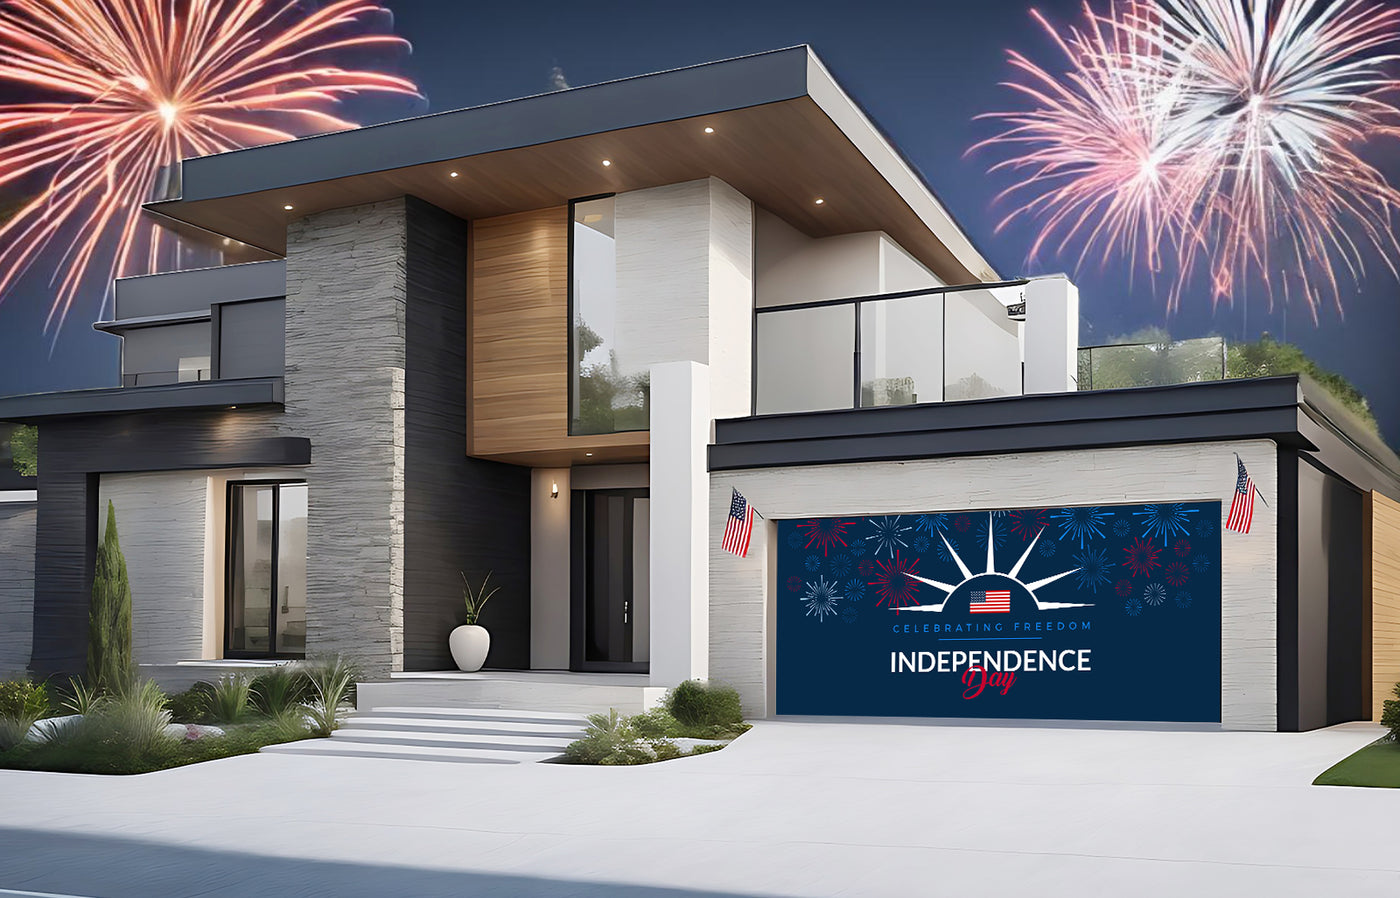 Freedom Fireworks Happy 4th of July Garage Door Cover Banner